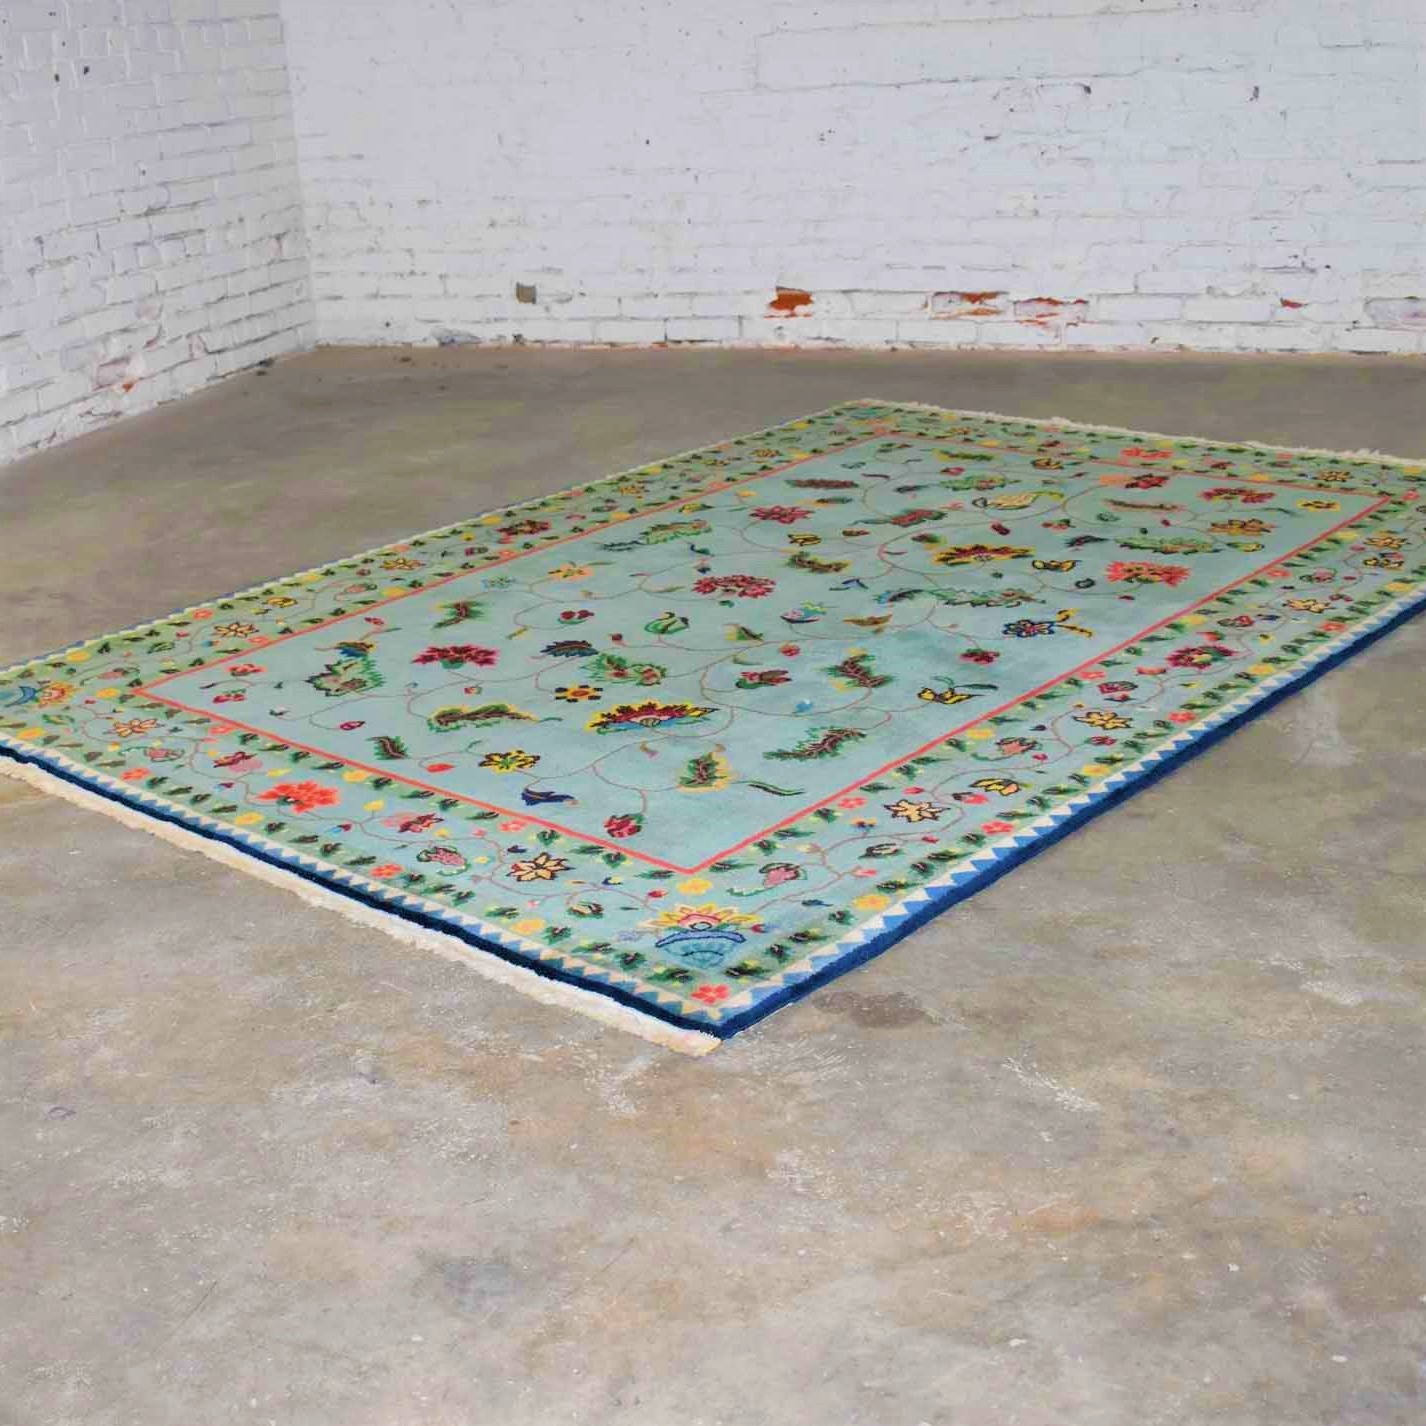 Vintage Chinese Peking Wool Handmade Rug in Teal Green with Overall Pattern 6’x 8.9’